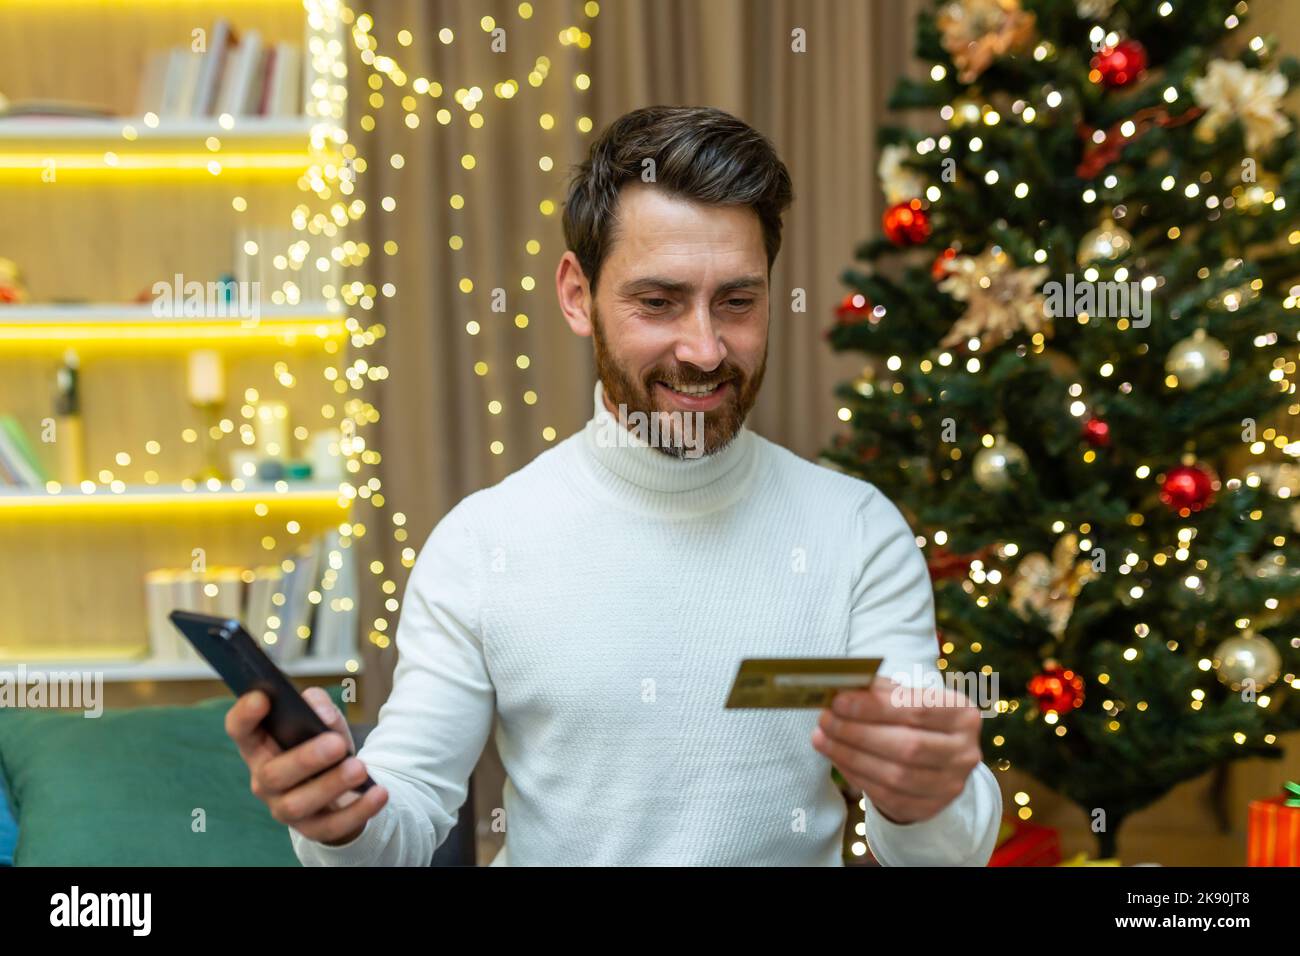 Man alone at home on Christmas celebrating new year, sitting on sofa and holding smartphone and bank credit card, happy smiling online shopping choosing gifts for friends and family remotely. Stock Photo